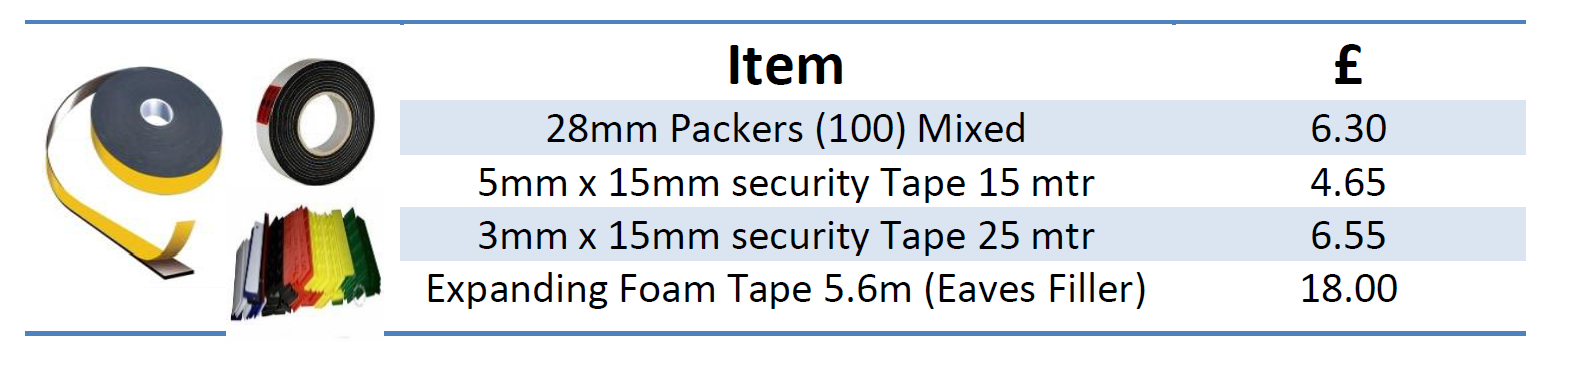 Packers and Tapes